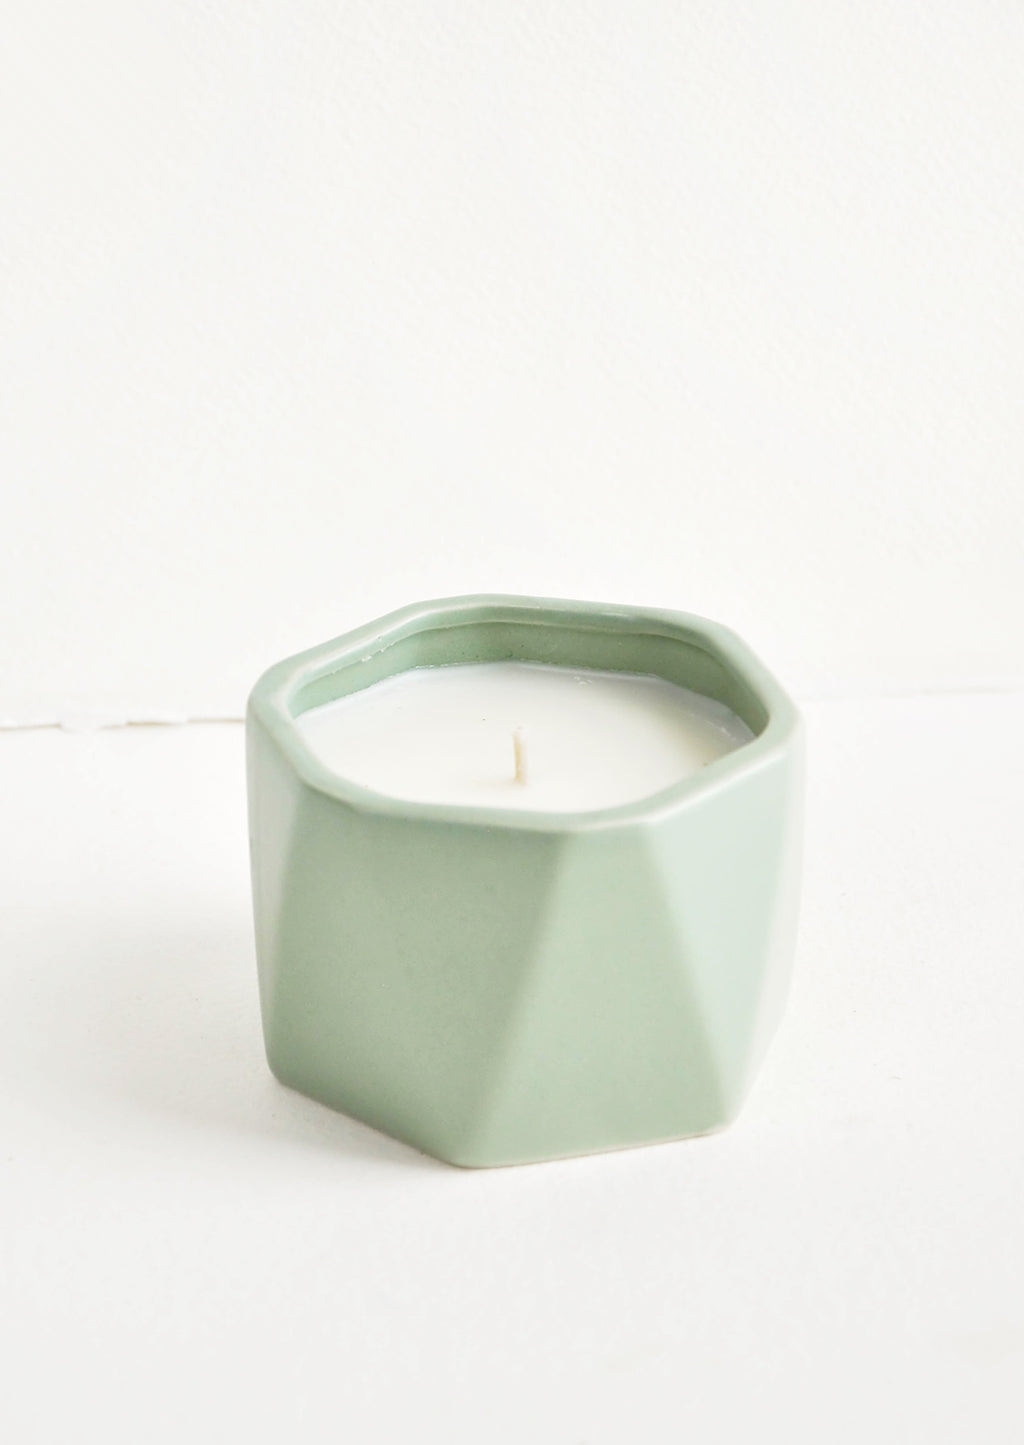 Santal Fig: A small candle in green faceted ceramic vessel.